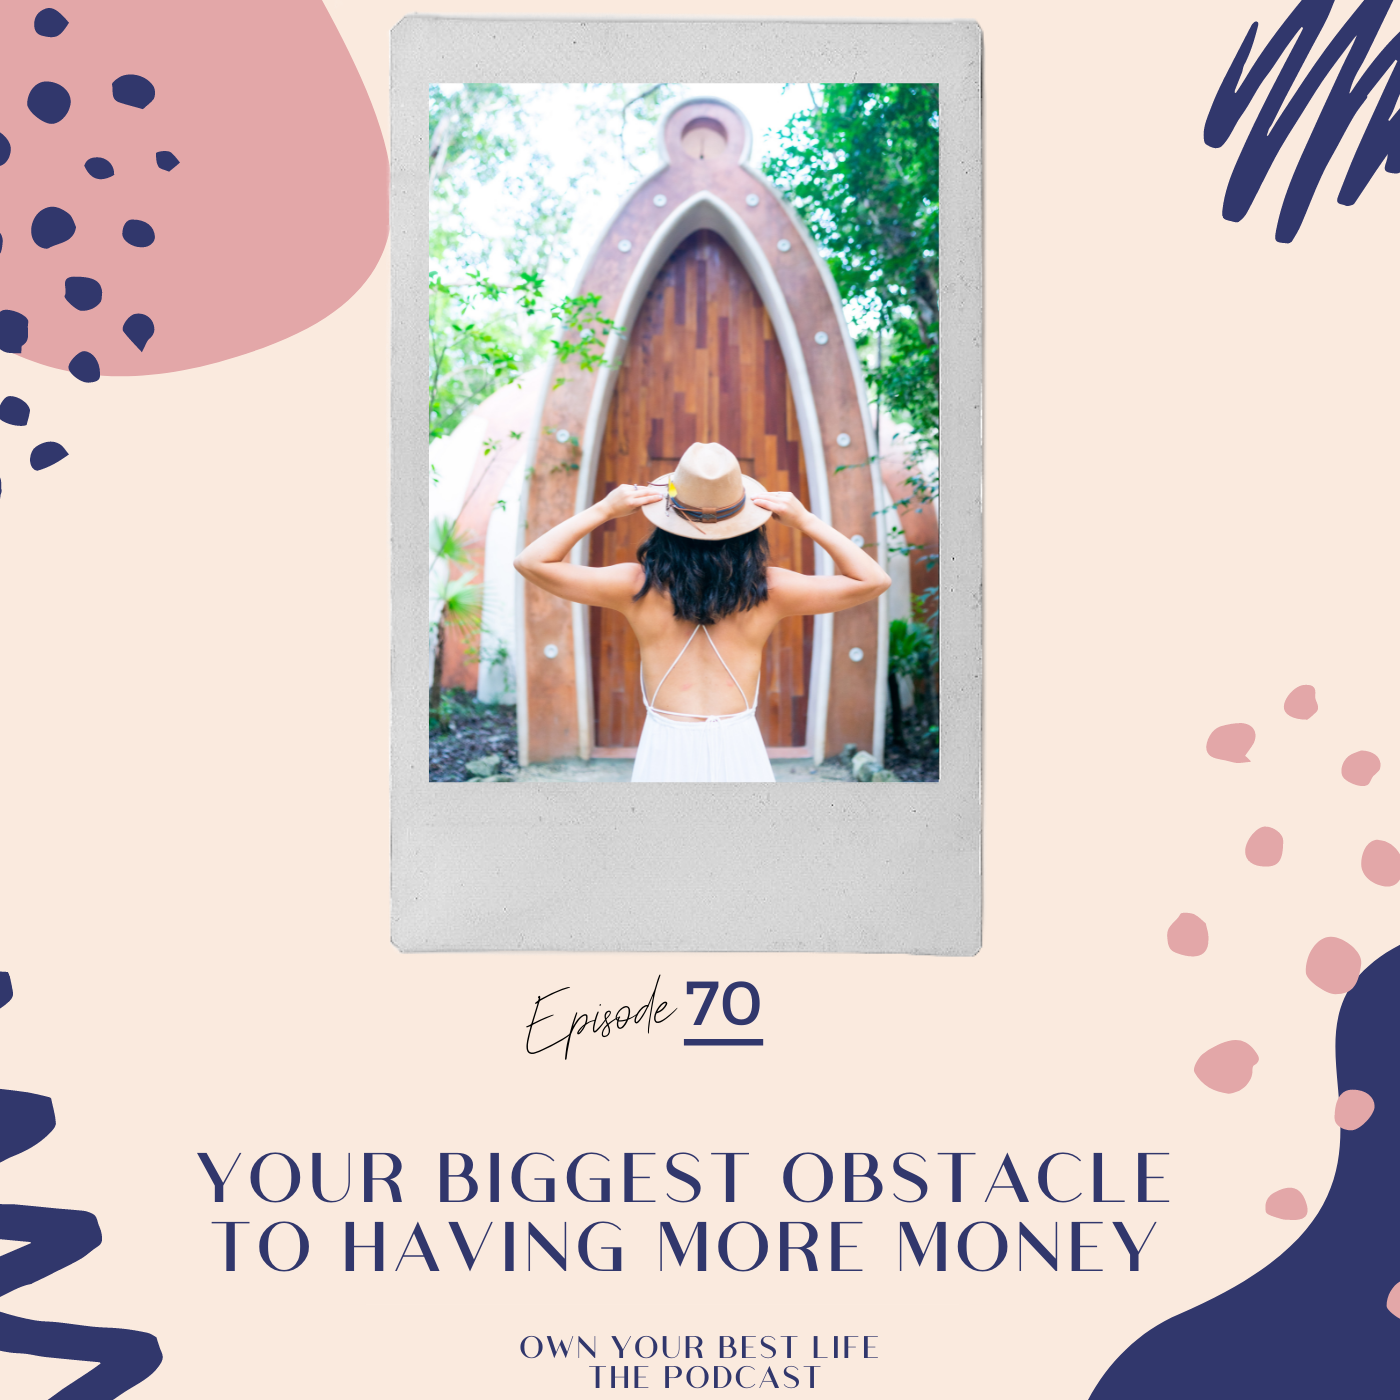 Your biggest obstacle to having more money